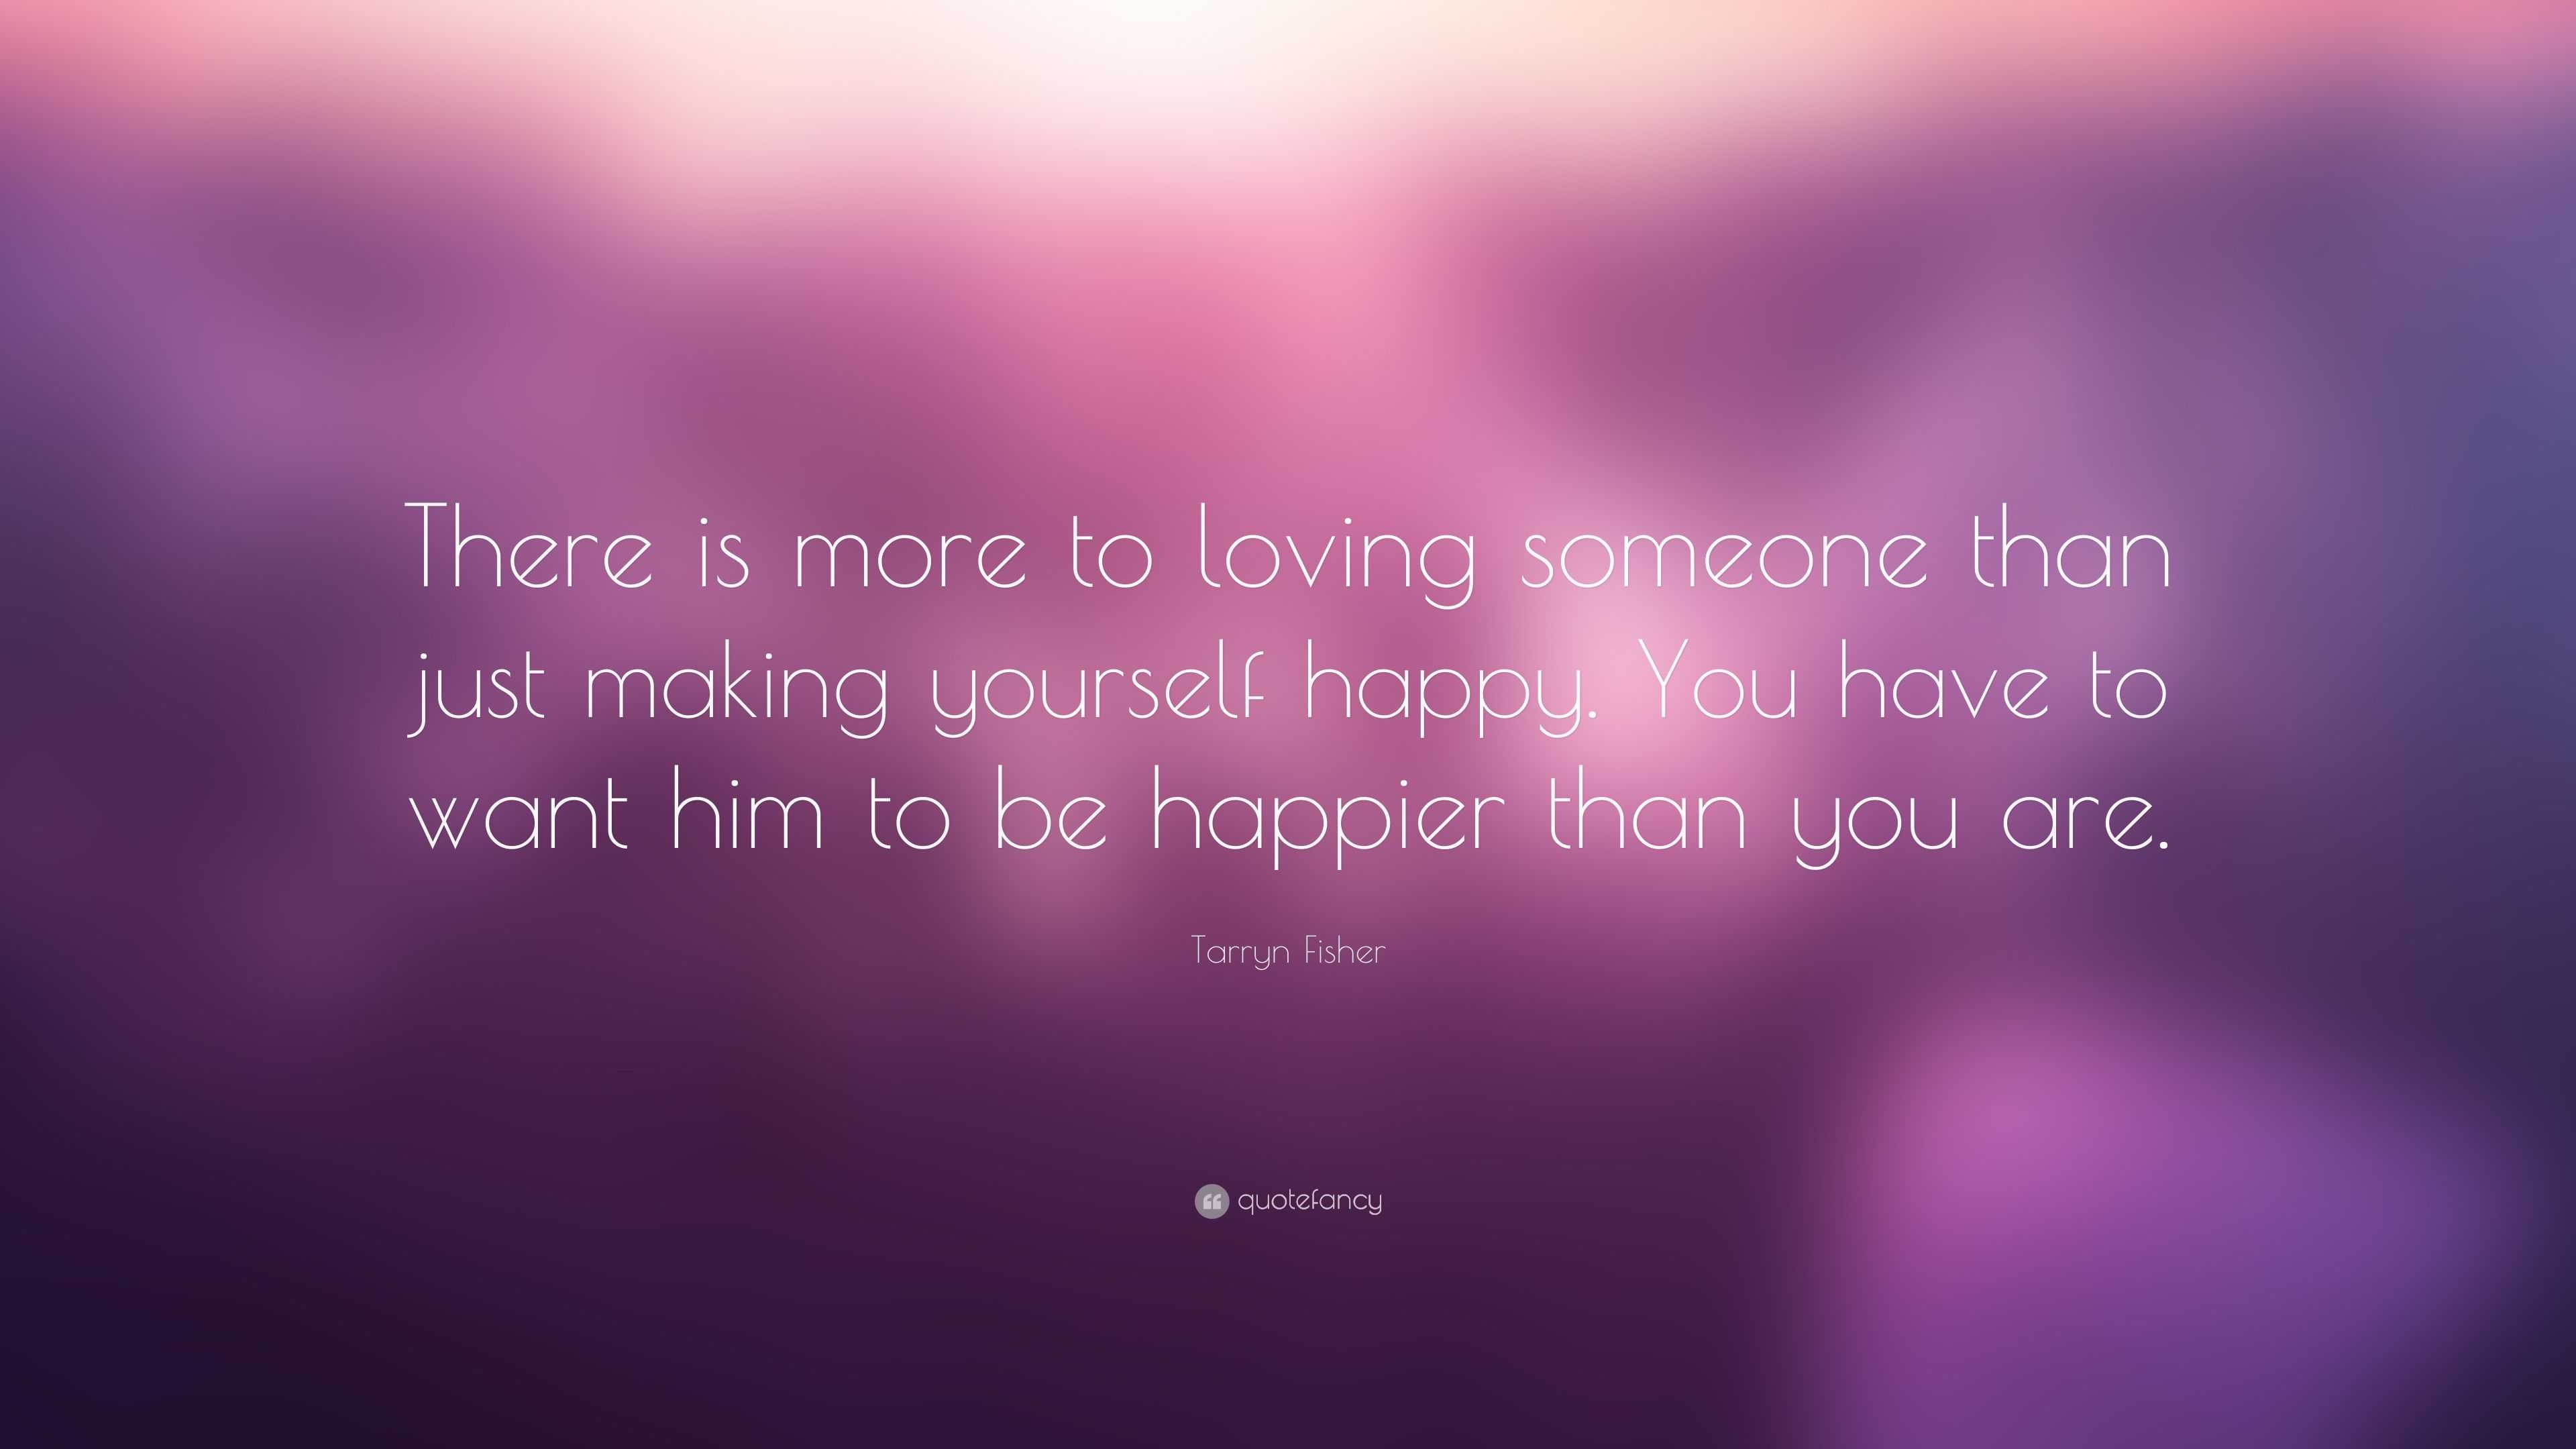 Tarryn Fisher Quote “There is more to loving someone than just making yourself happy